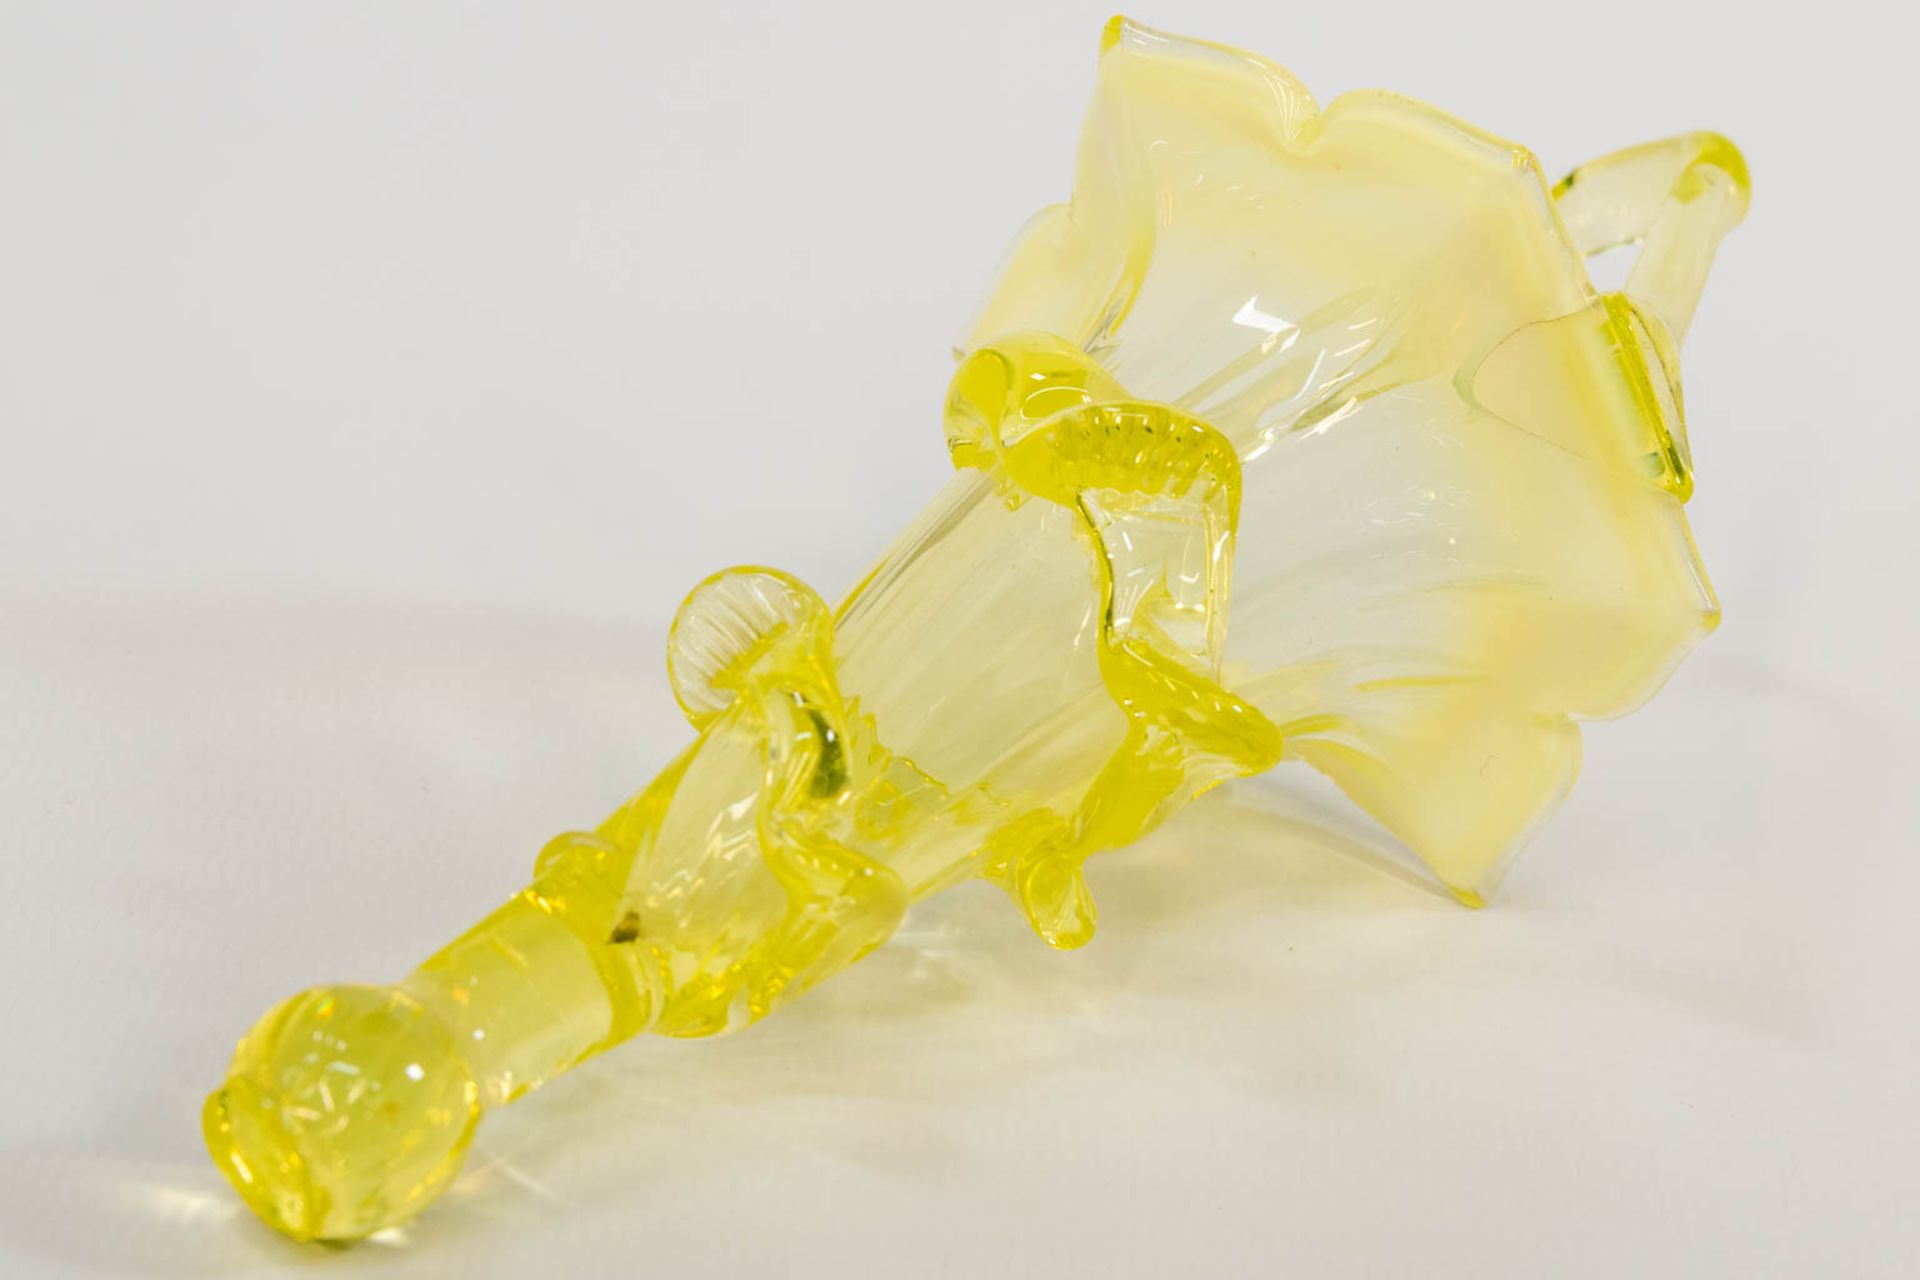 A yellow and clear glass table centrepiece pic-fleur, made in Murano, Italy. (25 x 28 x 45 cm) - Image 11 of 15